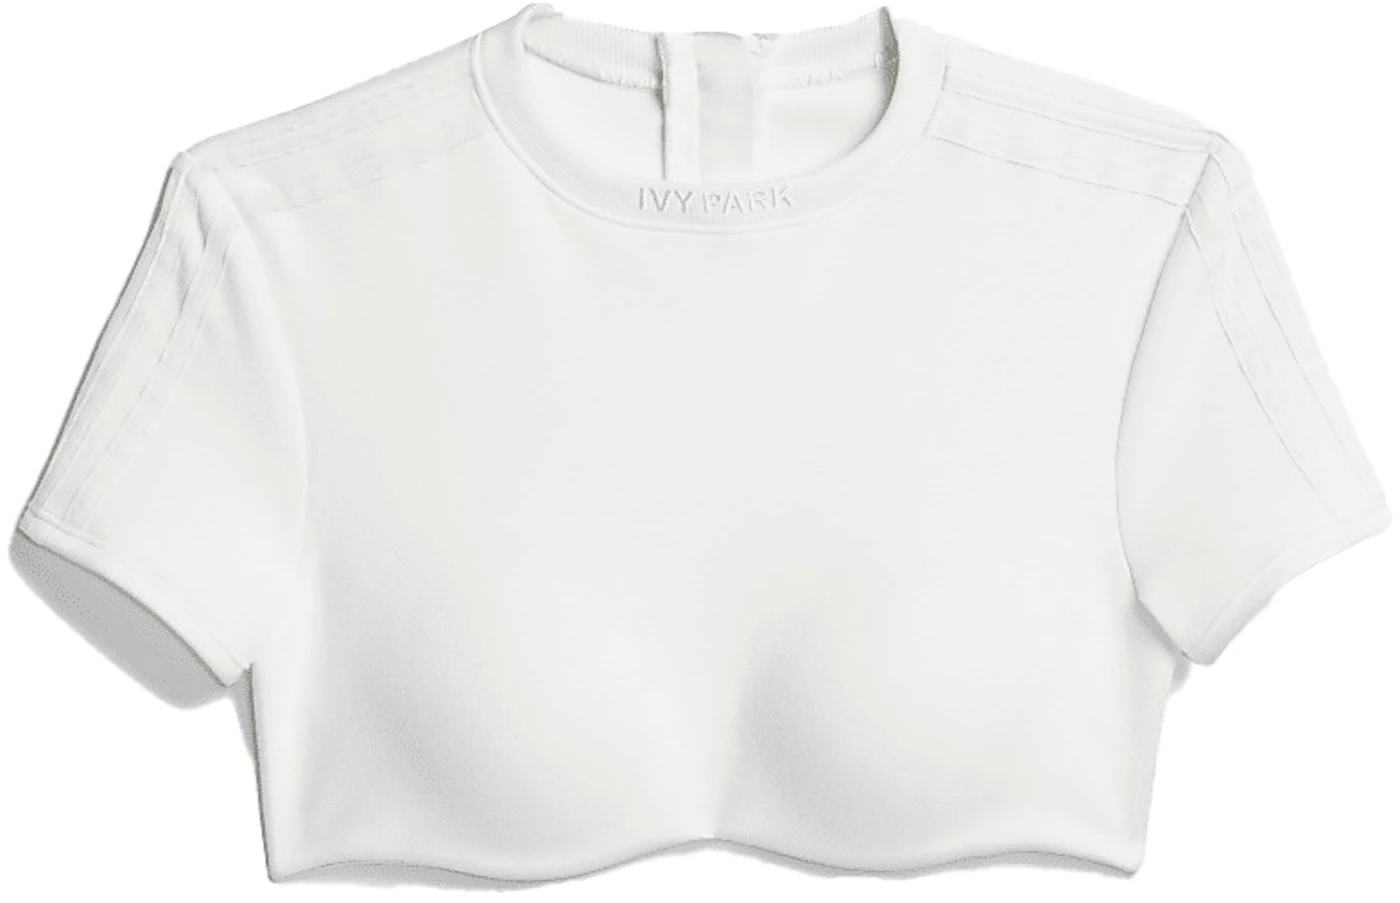 Adidas Ivy Park Crop Top Off White - Ss21 - Us